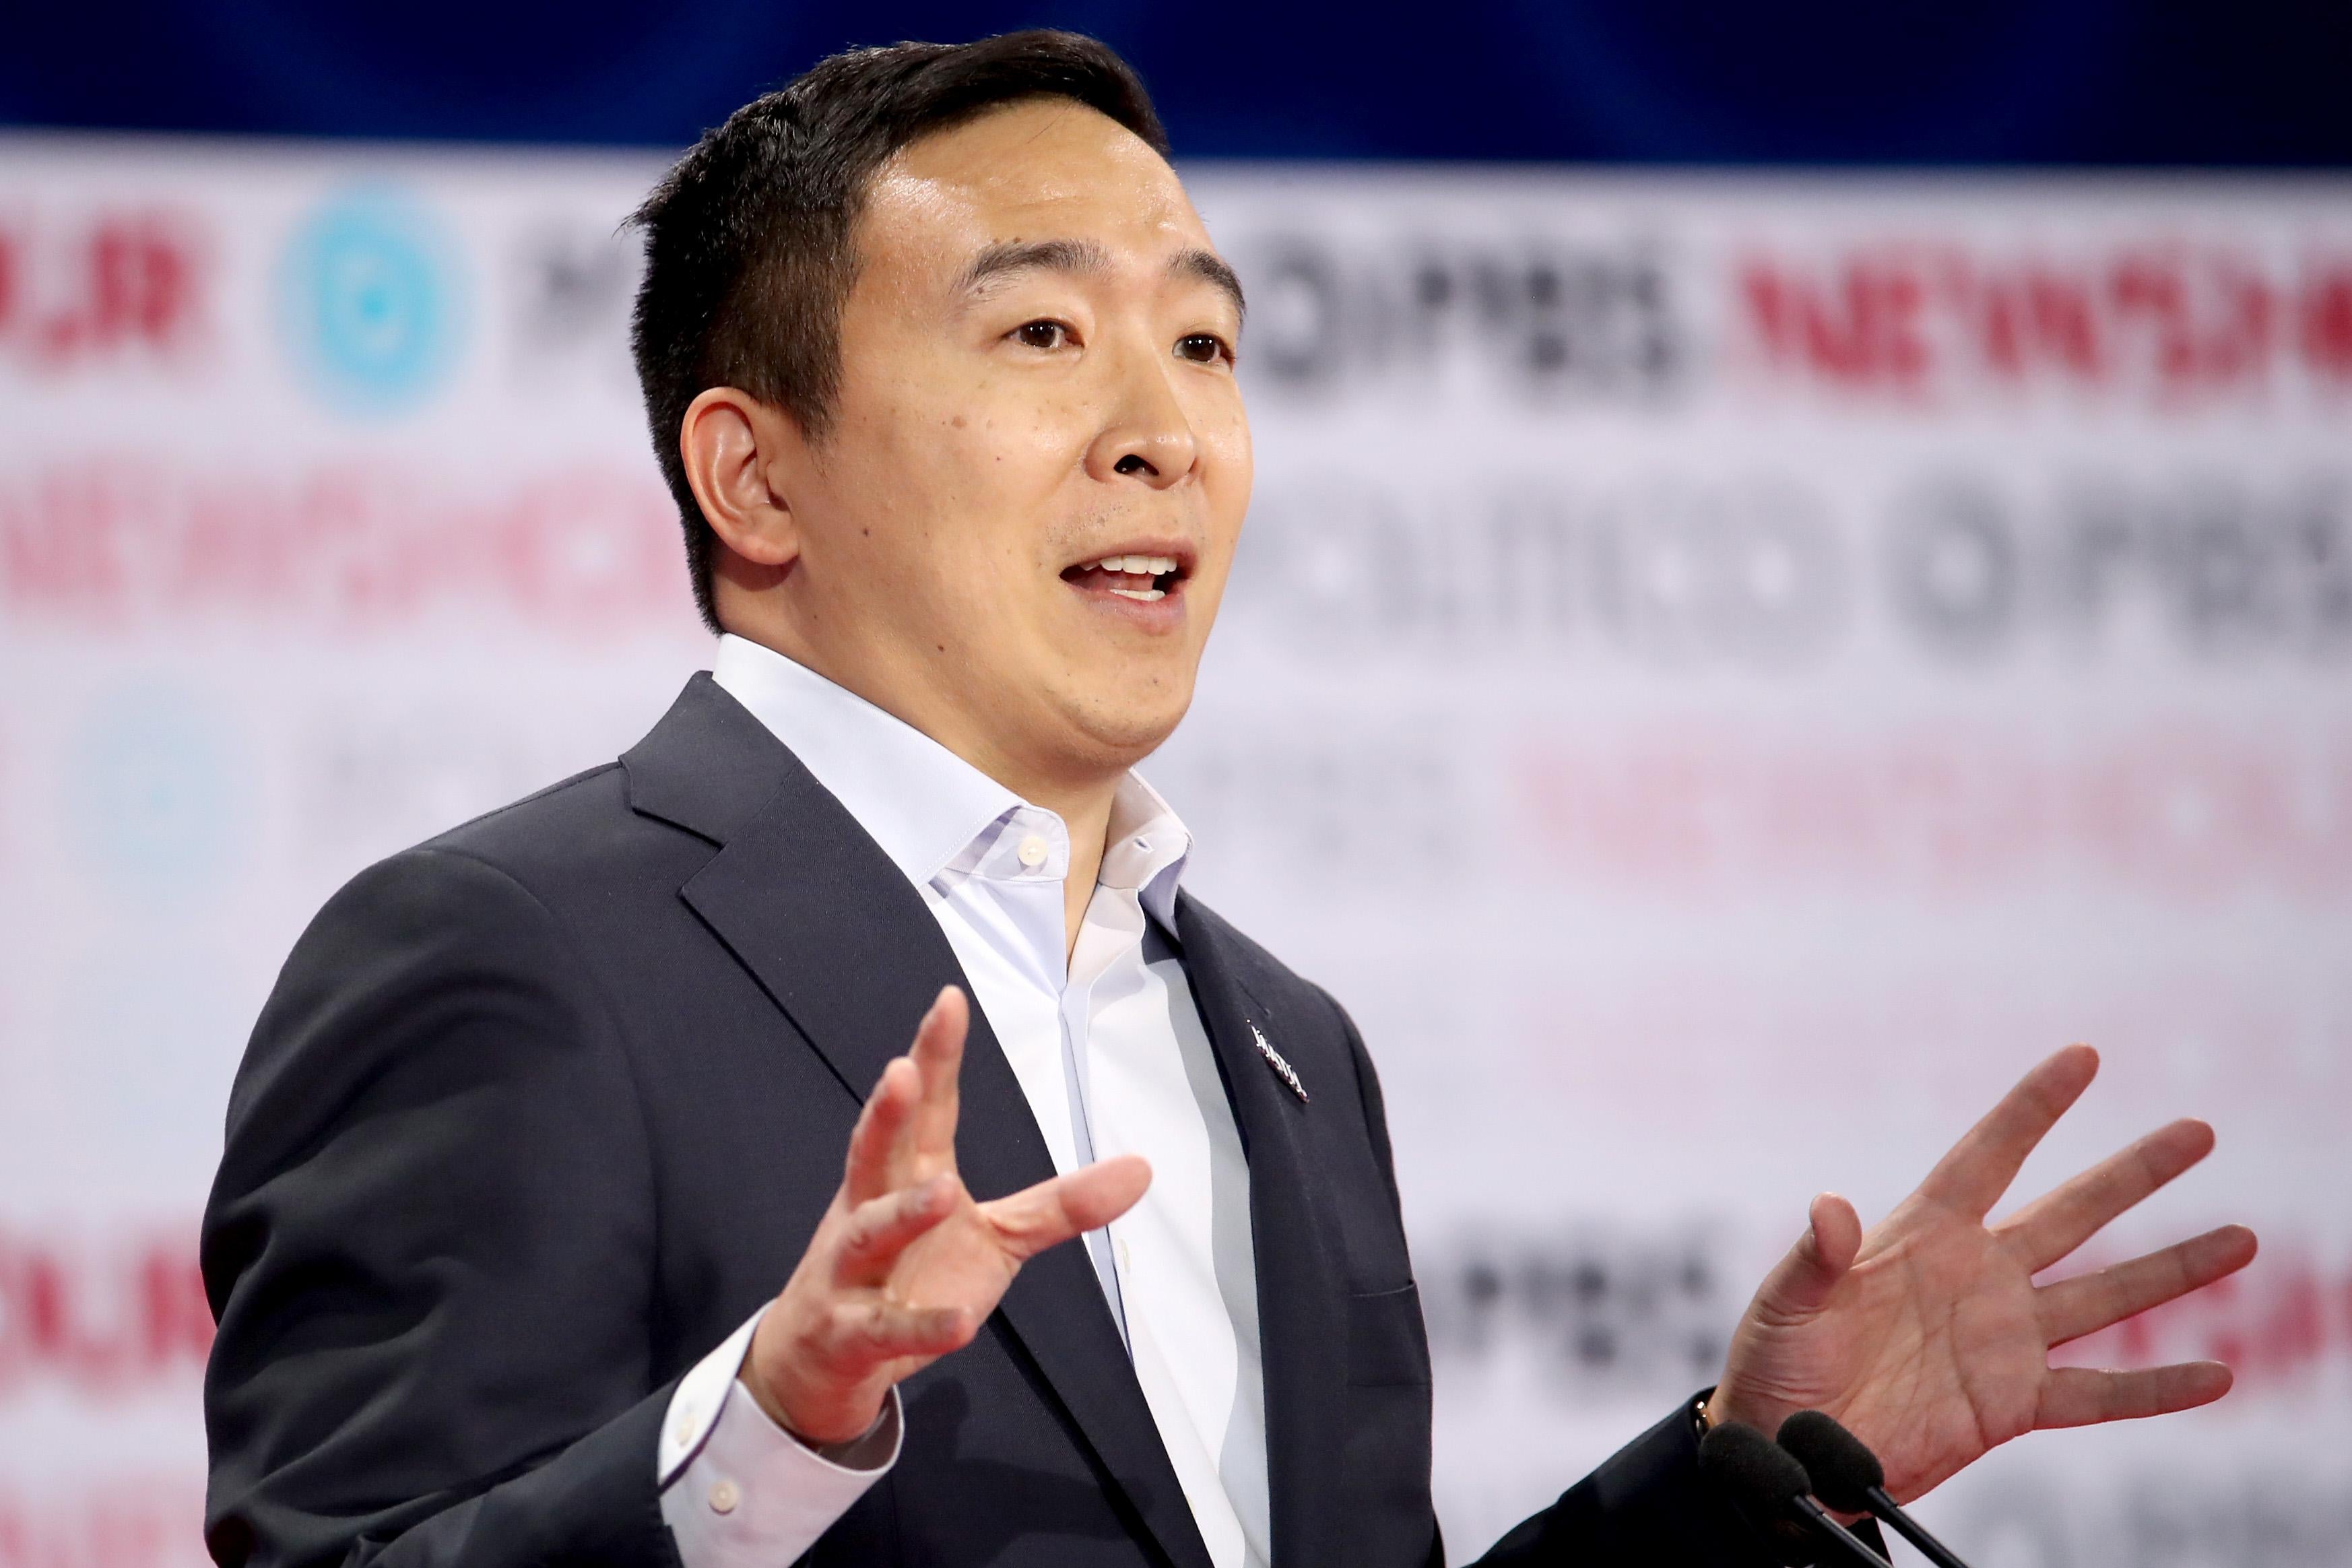 Andrew Yang speaks with raised hands at a podium on the debate stage